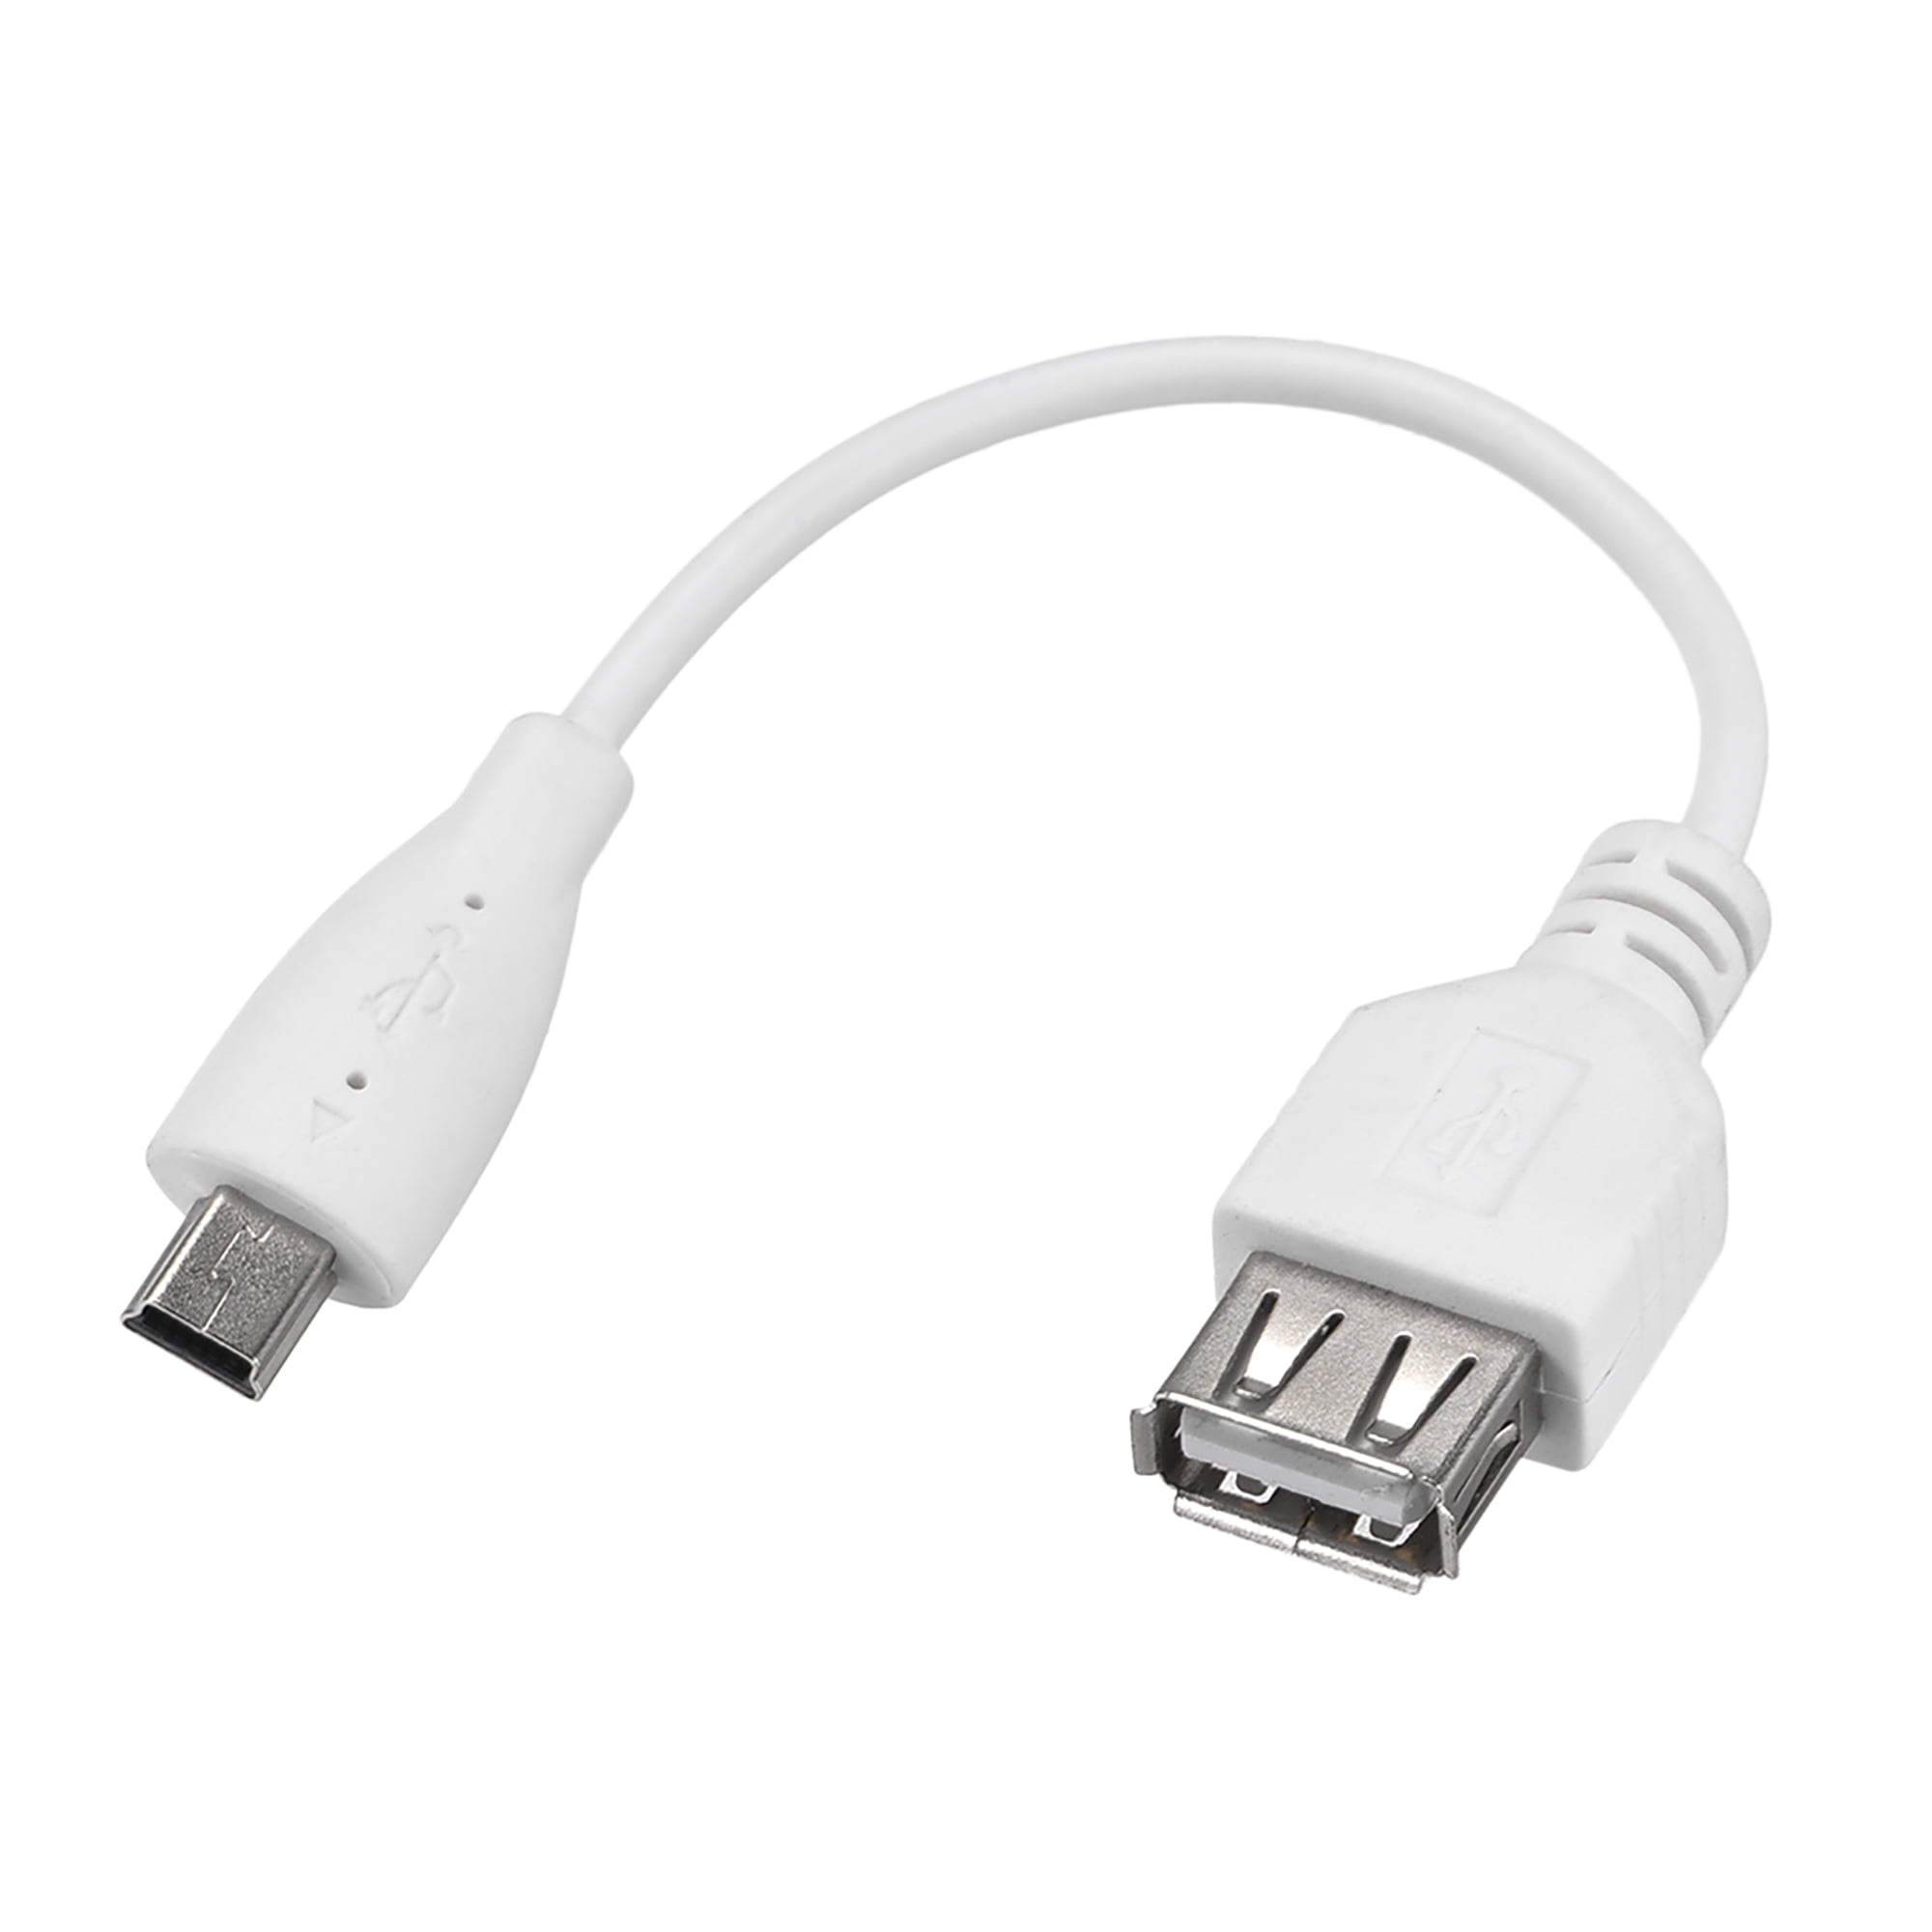 Uxcell 2pack Micro USB Cables Chargers USB to Mini USB T Male Cables 14cm Length White